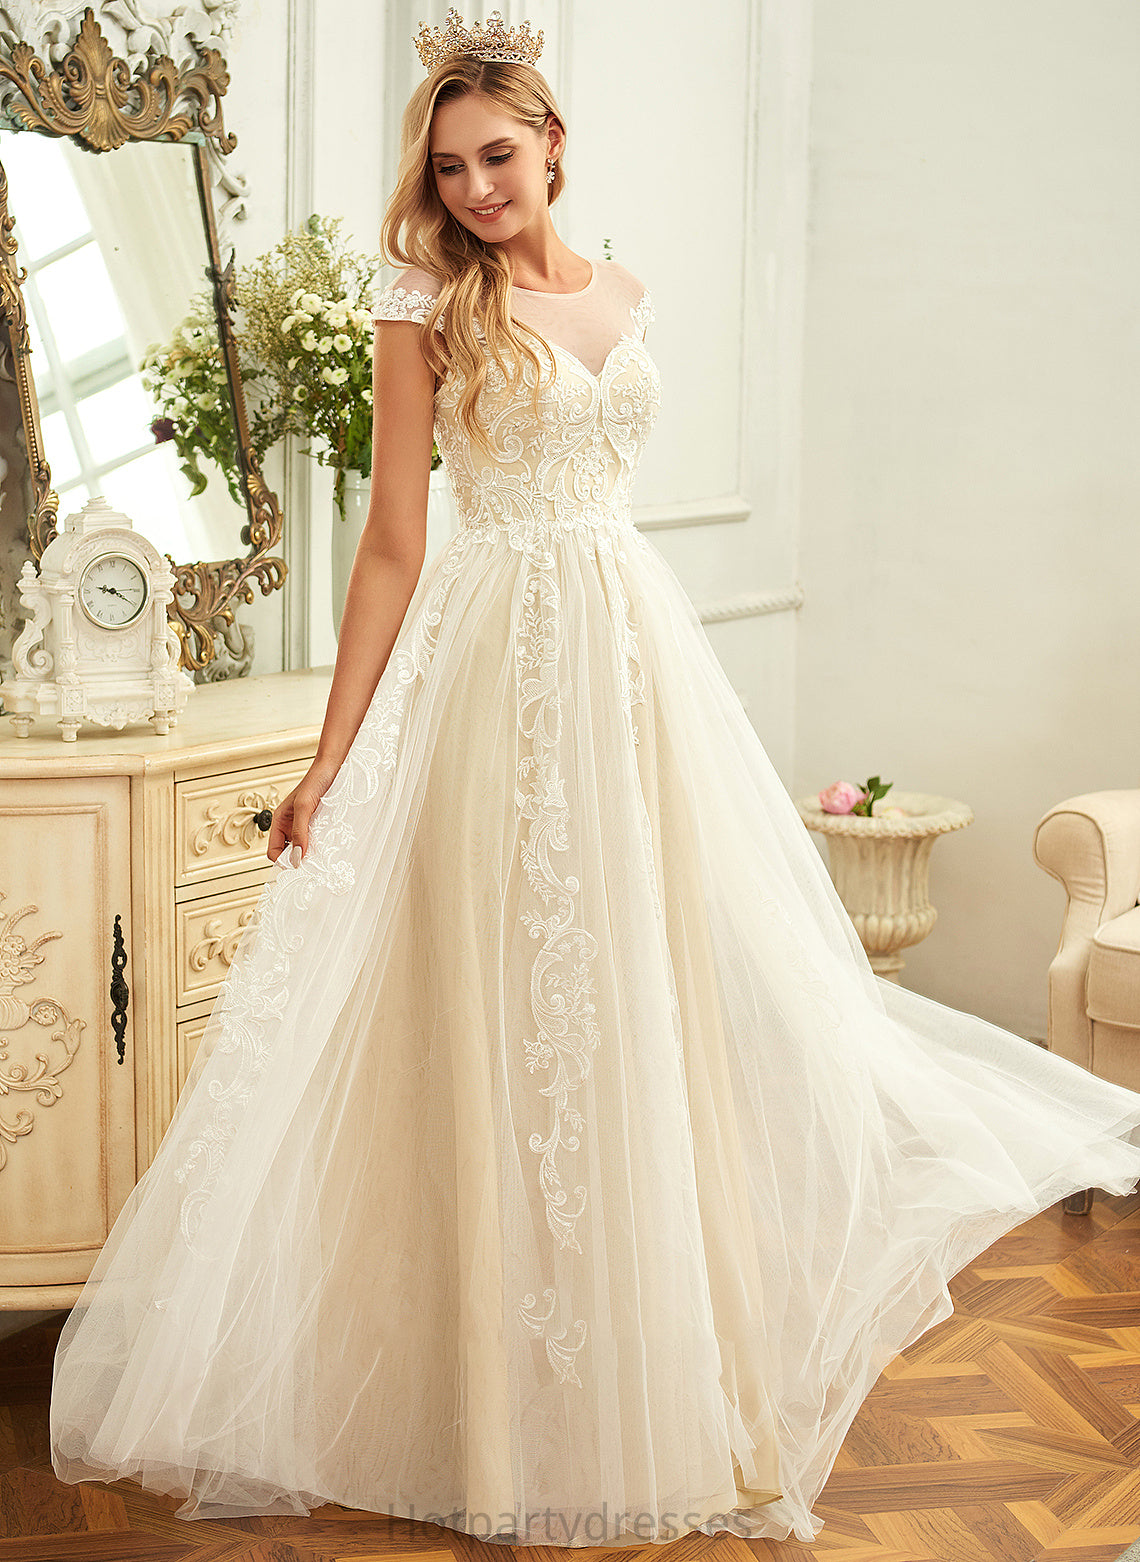 Lace Neck Lace Train Tulle Scoop Wedding Dresses Ruffle Dress Wedding With Laci A-Line Sweep